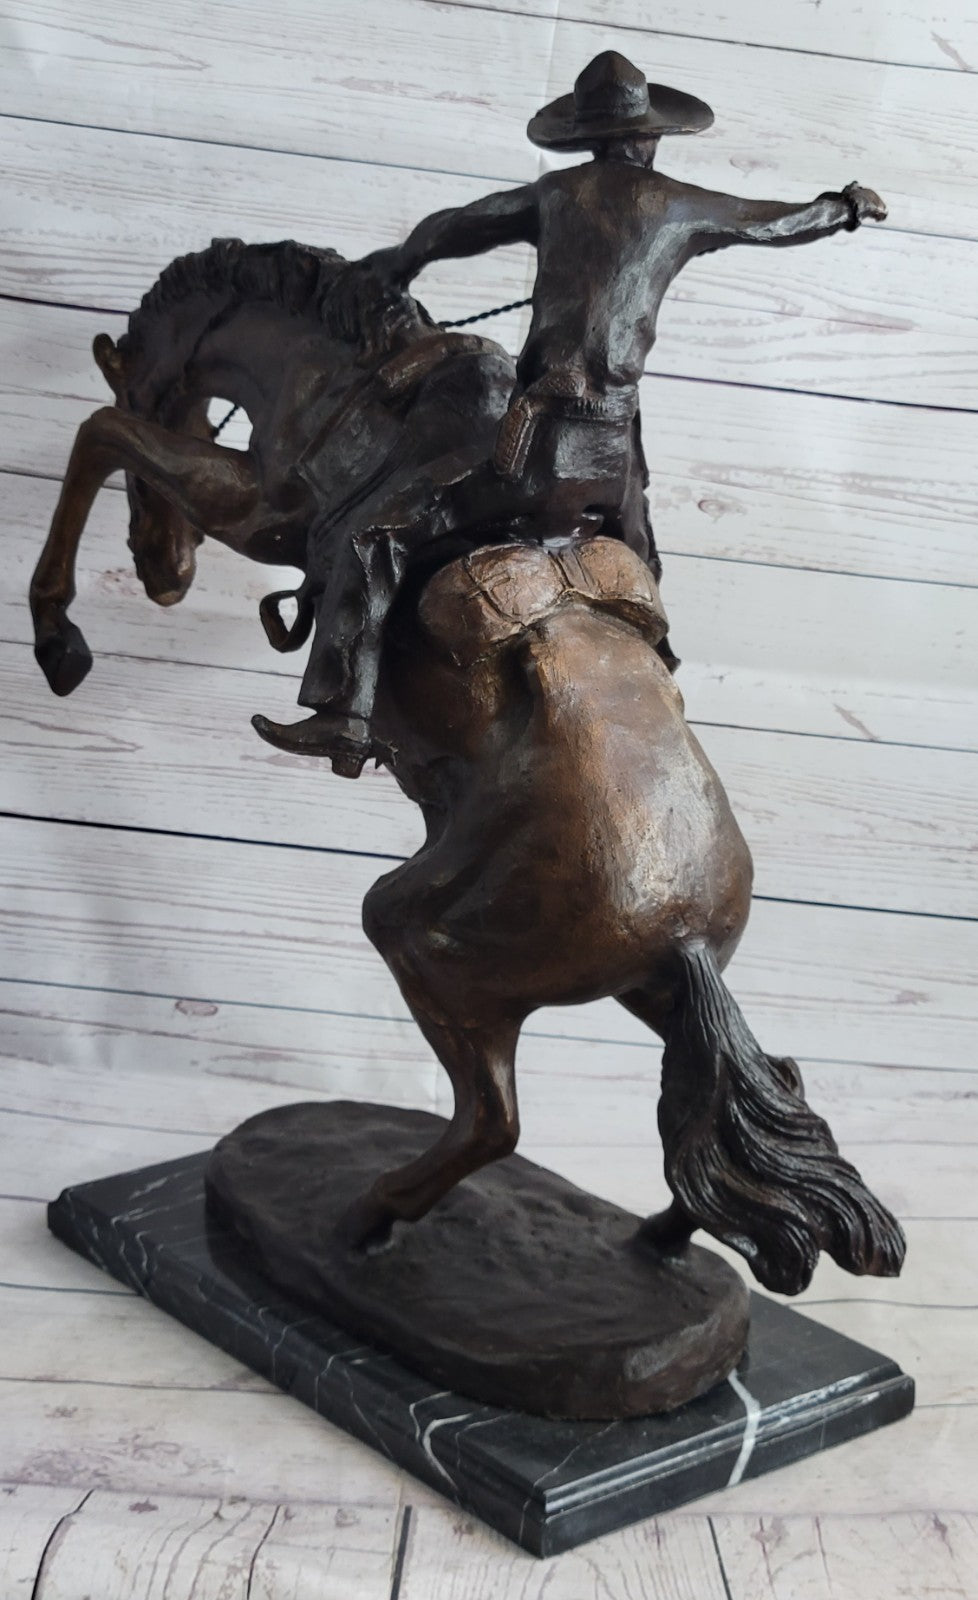 Bronze Sculpture White House Oval Office Bronco Buster by Remington Hot Cast Art